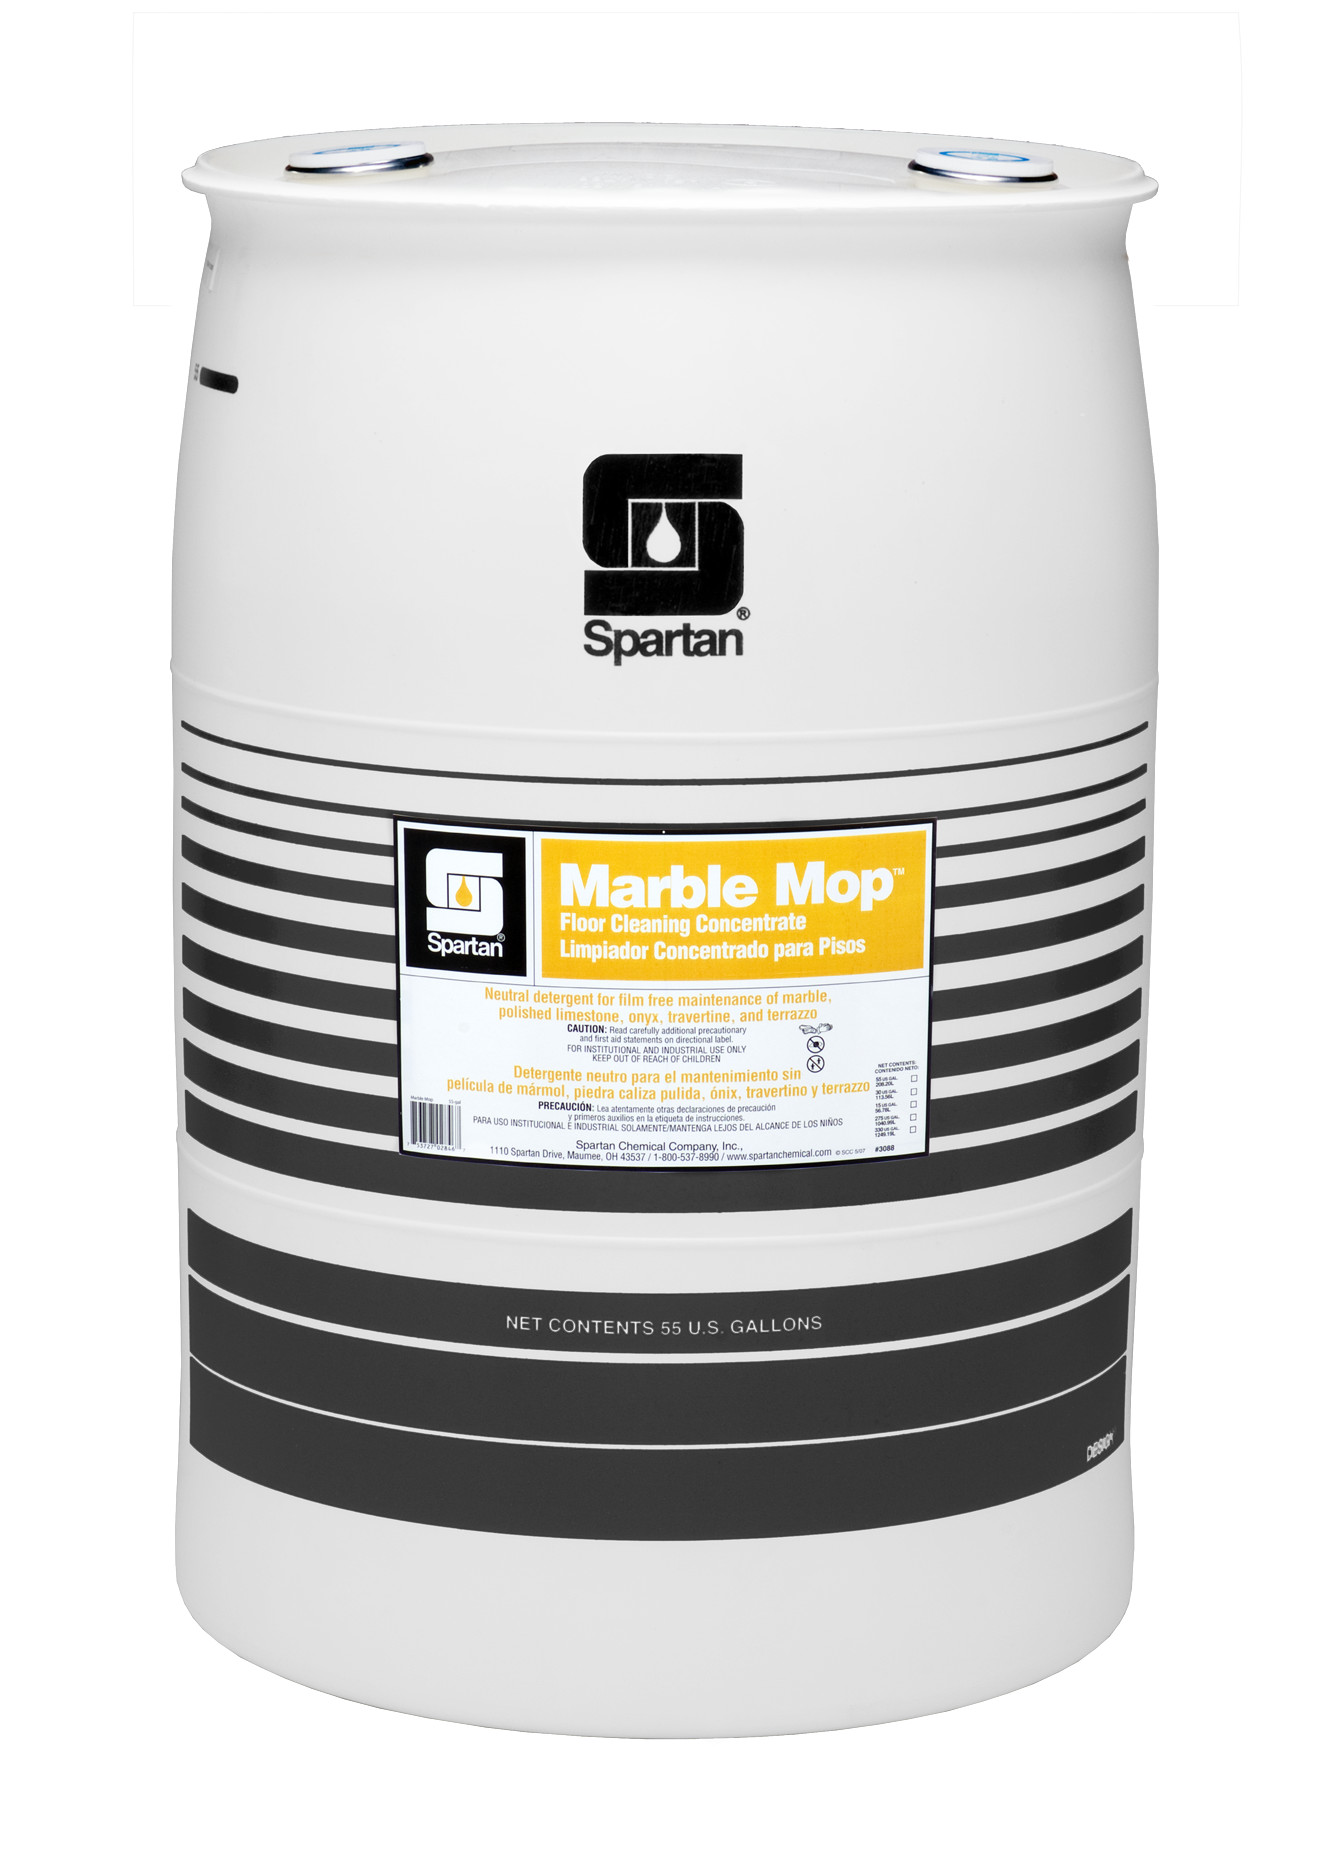 Spartan Chemical Company Marble Mop, 55 GAL DRUM